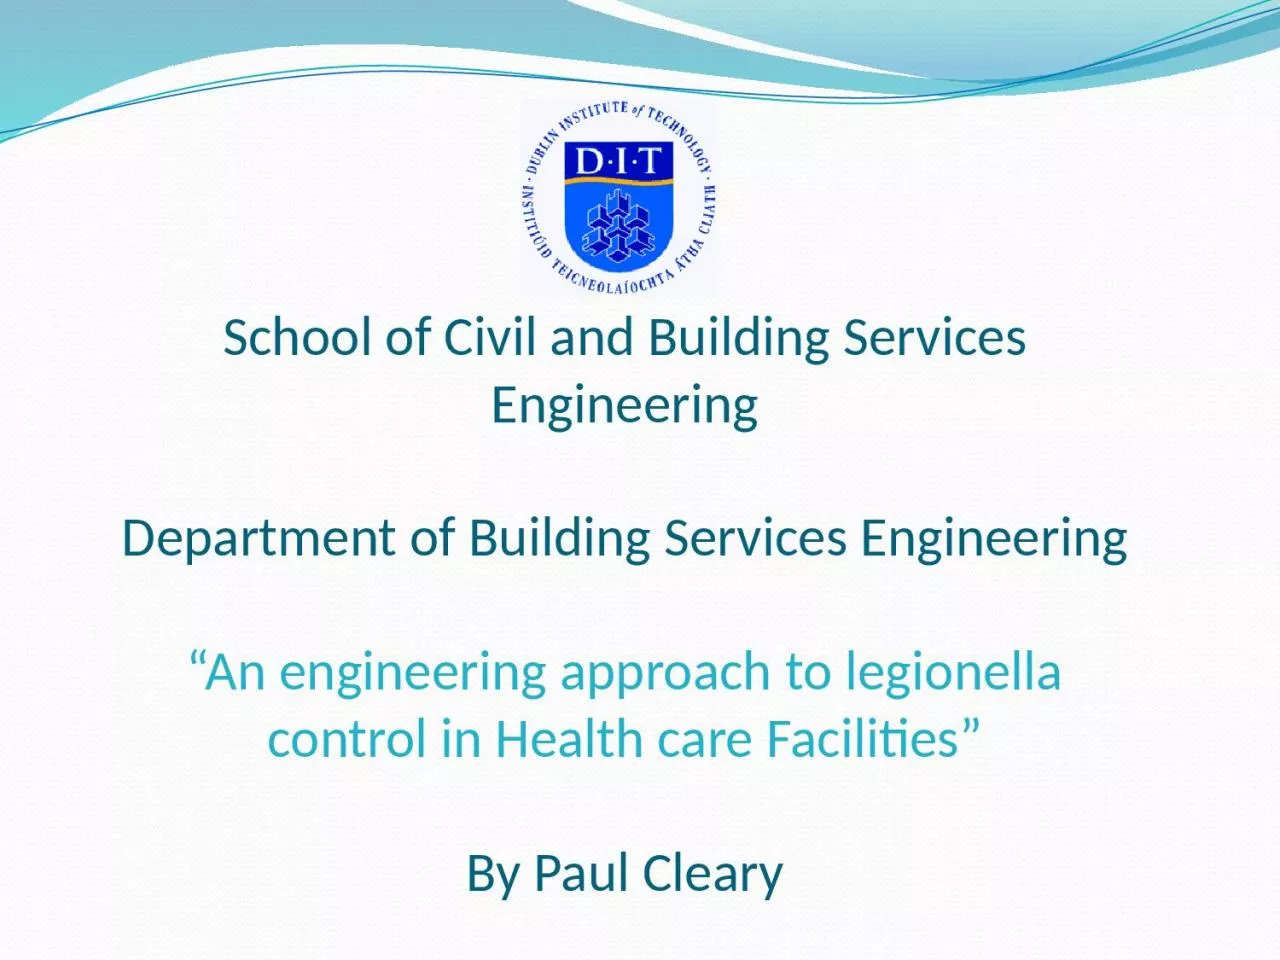 School of Civil and Building Services Engineering